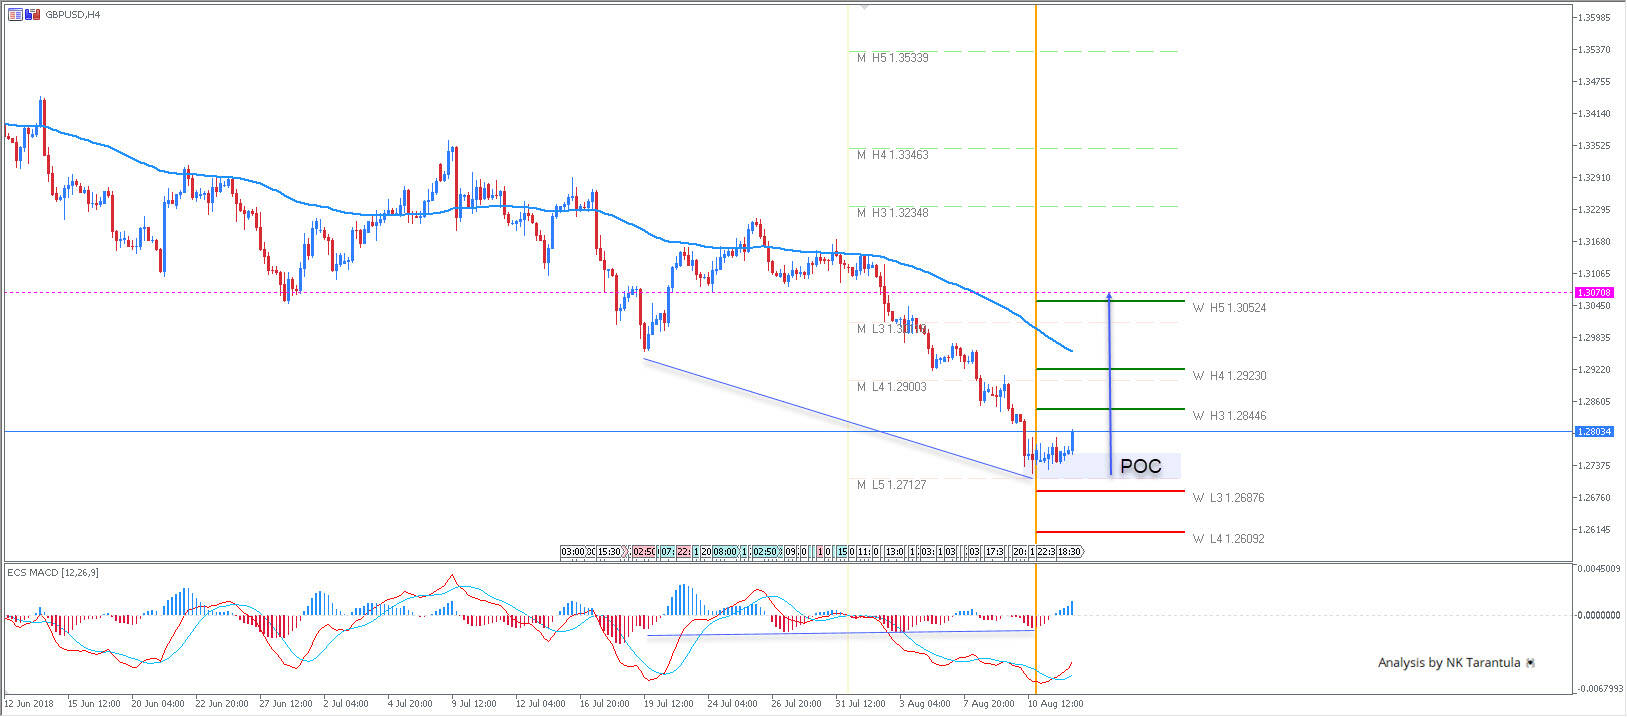 GBP/USD Could Initiate a Bigger Correction